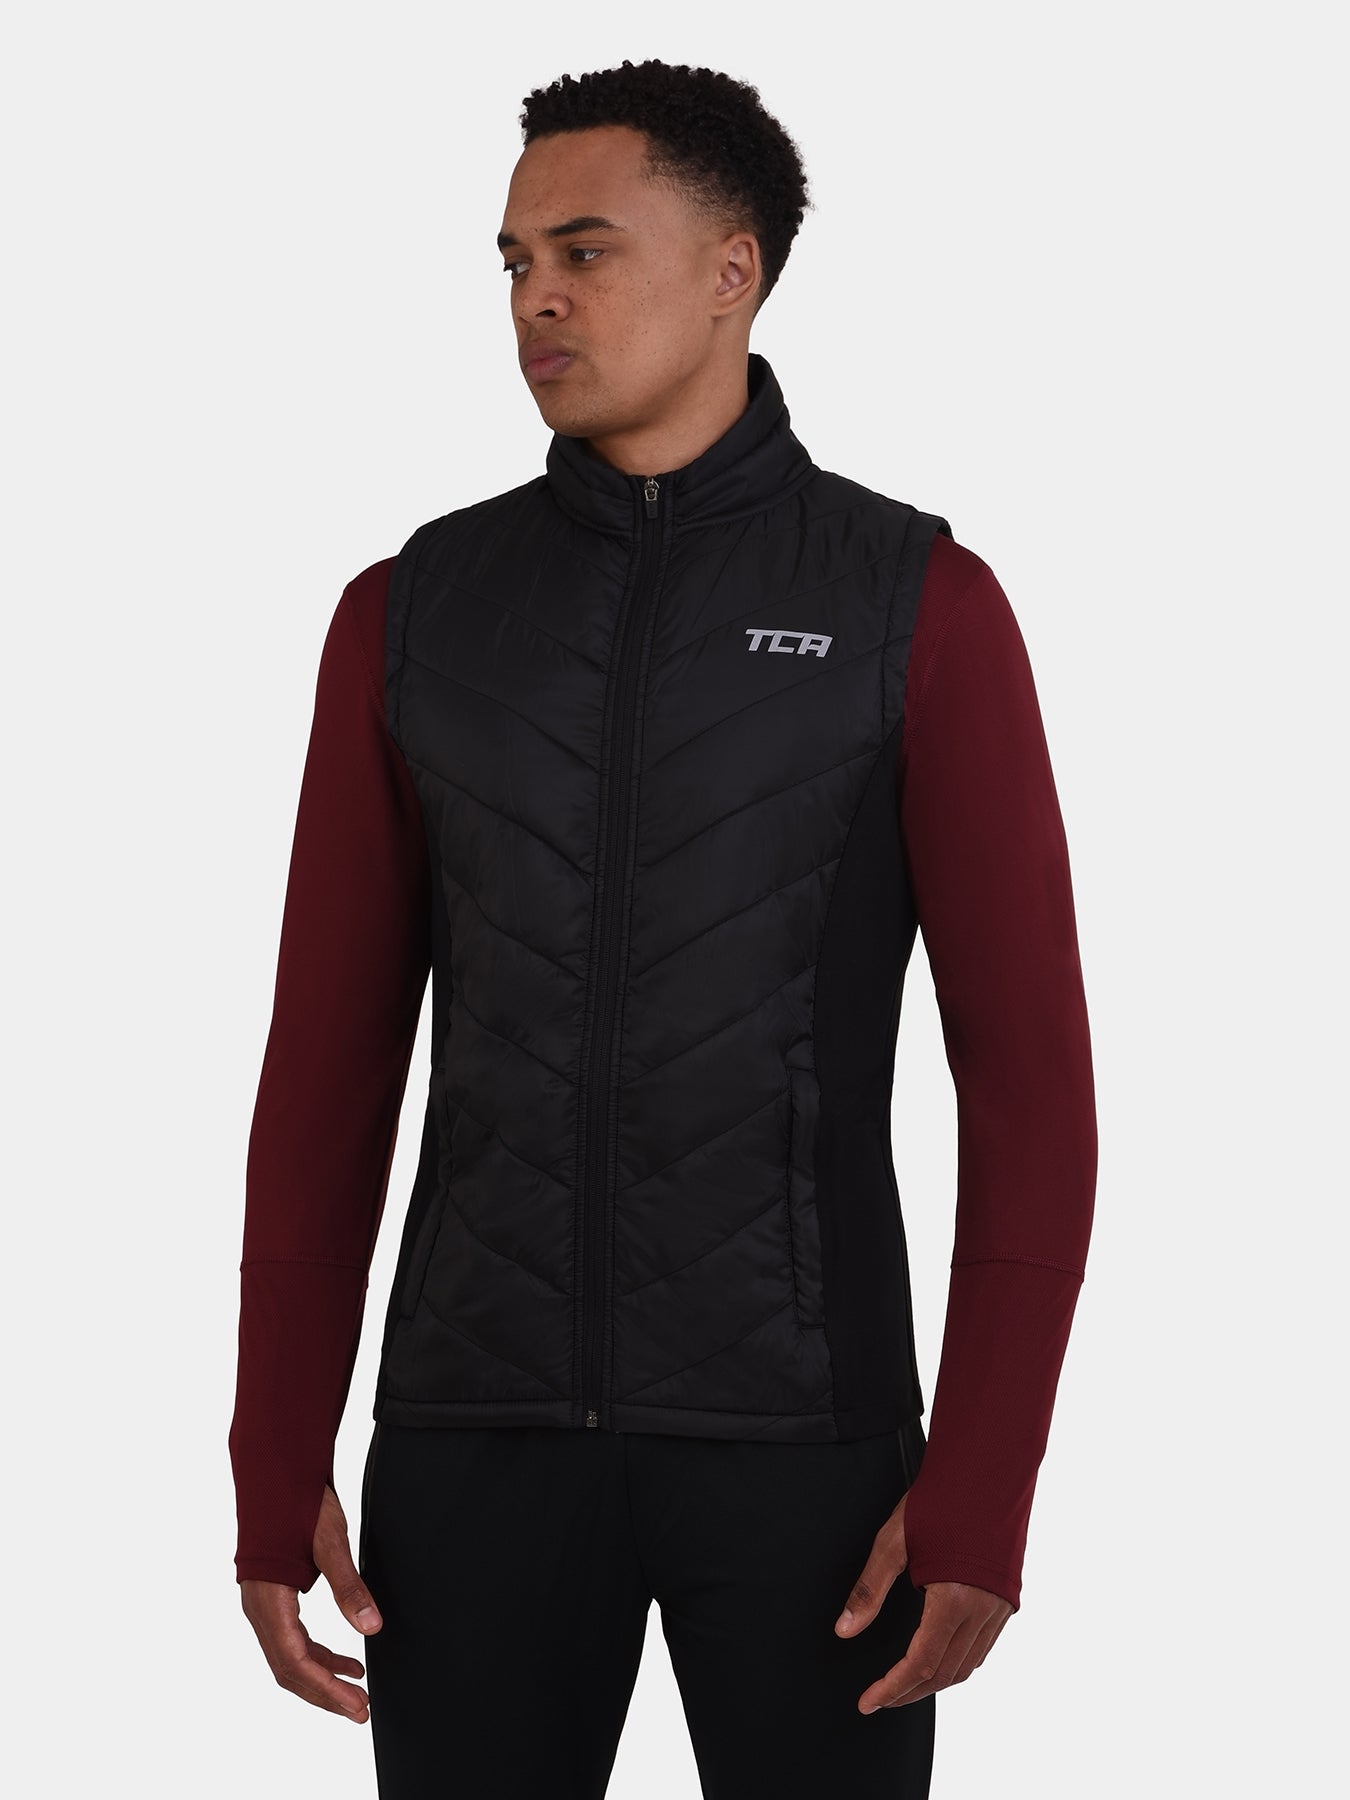 Men's Excel Running Sports Gilet with Zip Pockets - Black Stealth